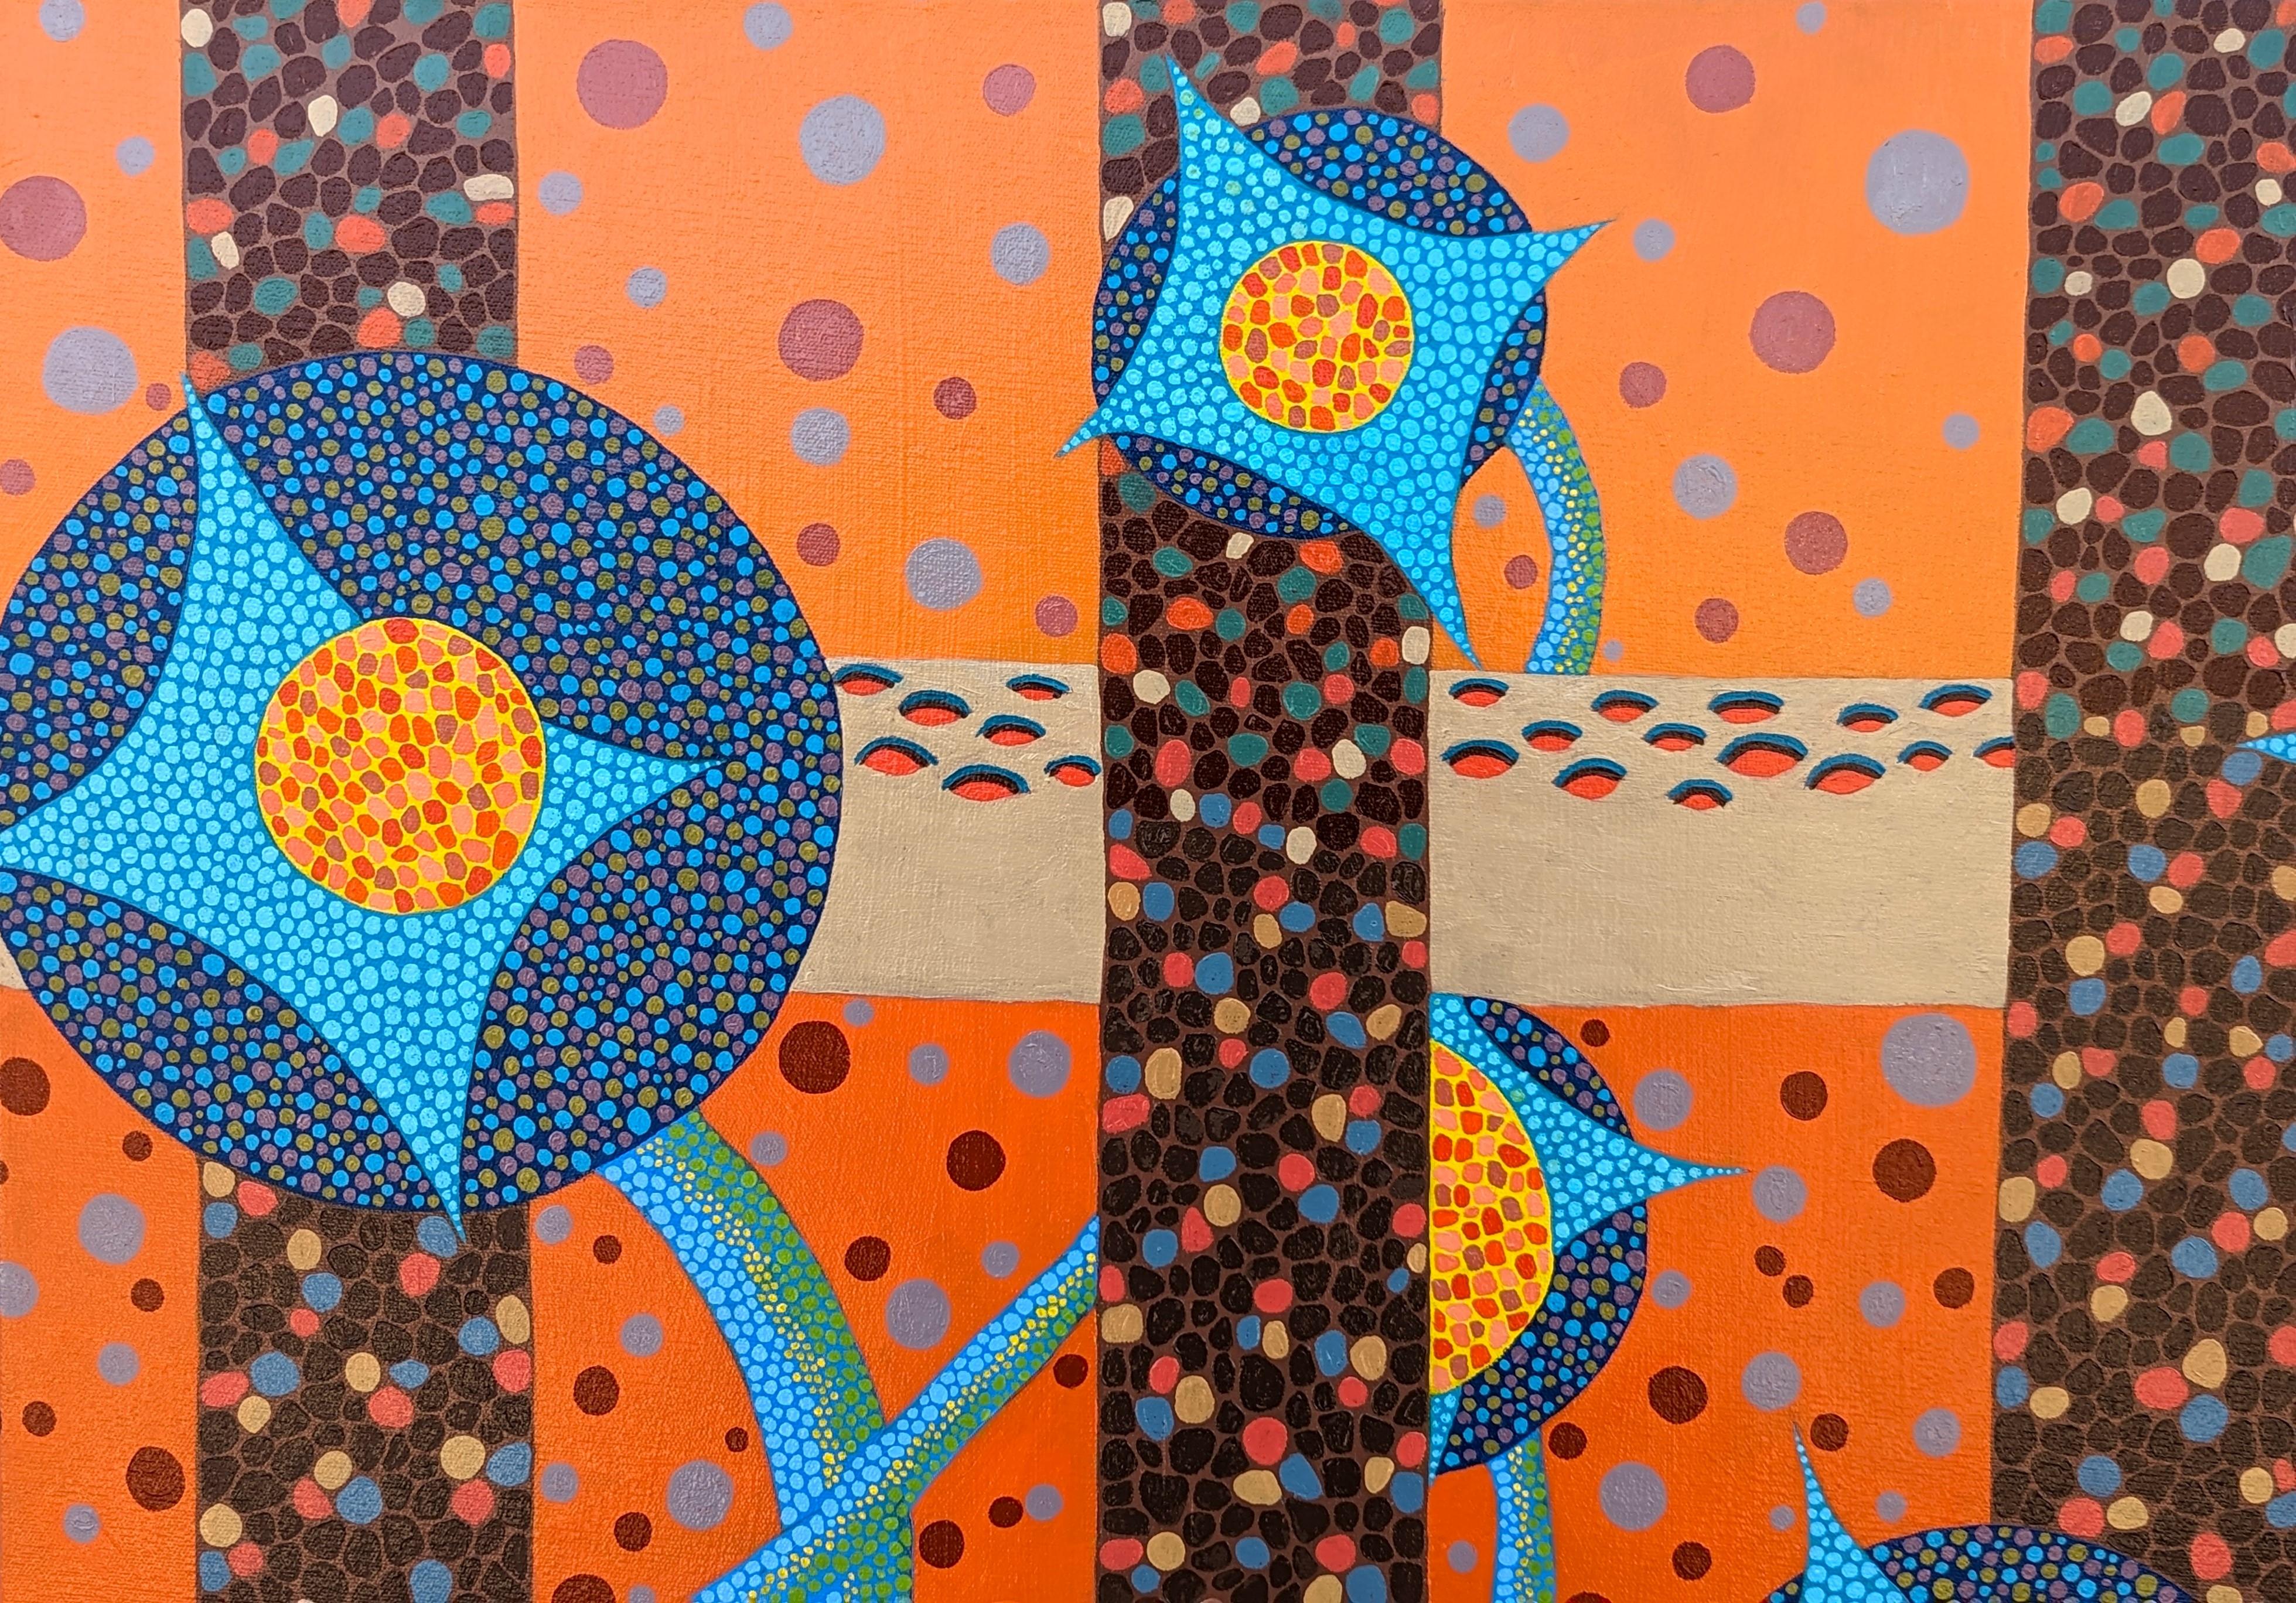 Orange, pink, blue, and brown abstract mosaic-style painting by Houston, TX artist Marguerite Baldwin. The piece depicts abstracted botanical elements such as flowers and vines growing against a brown-toned garden trellis. Signed and titled by the